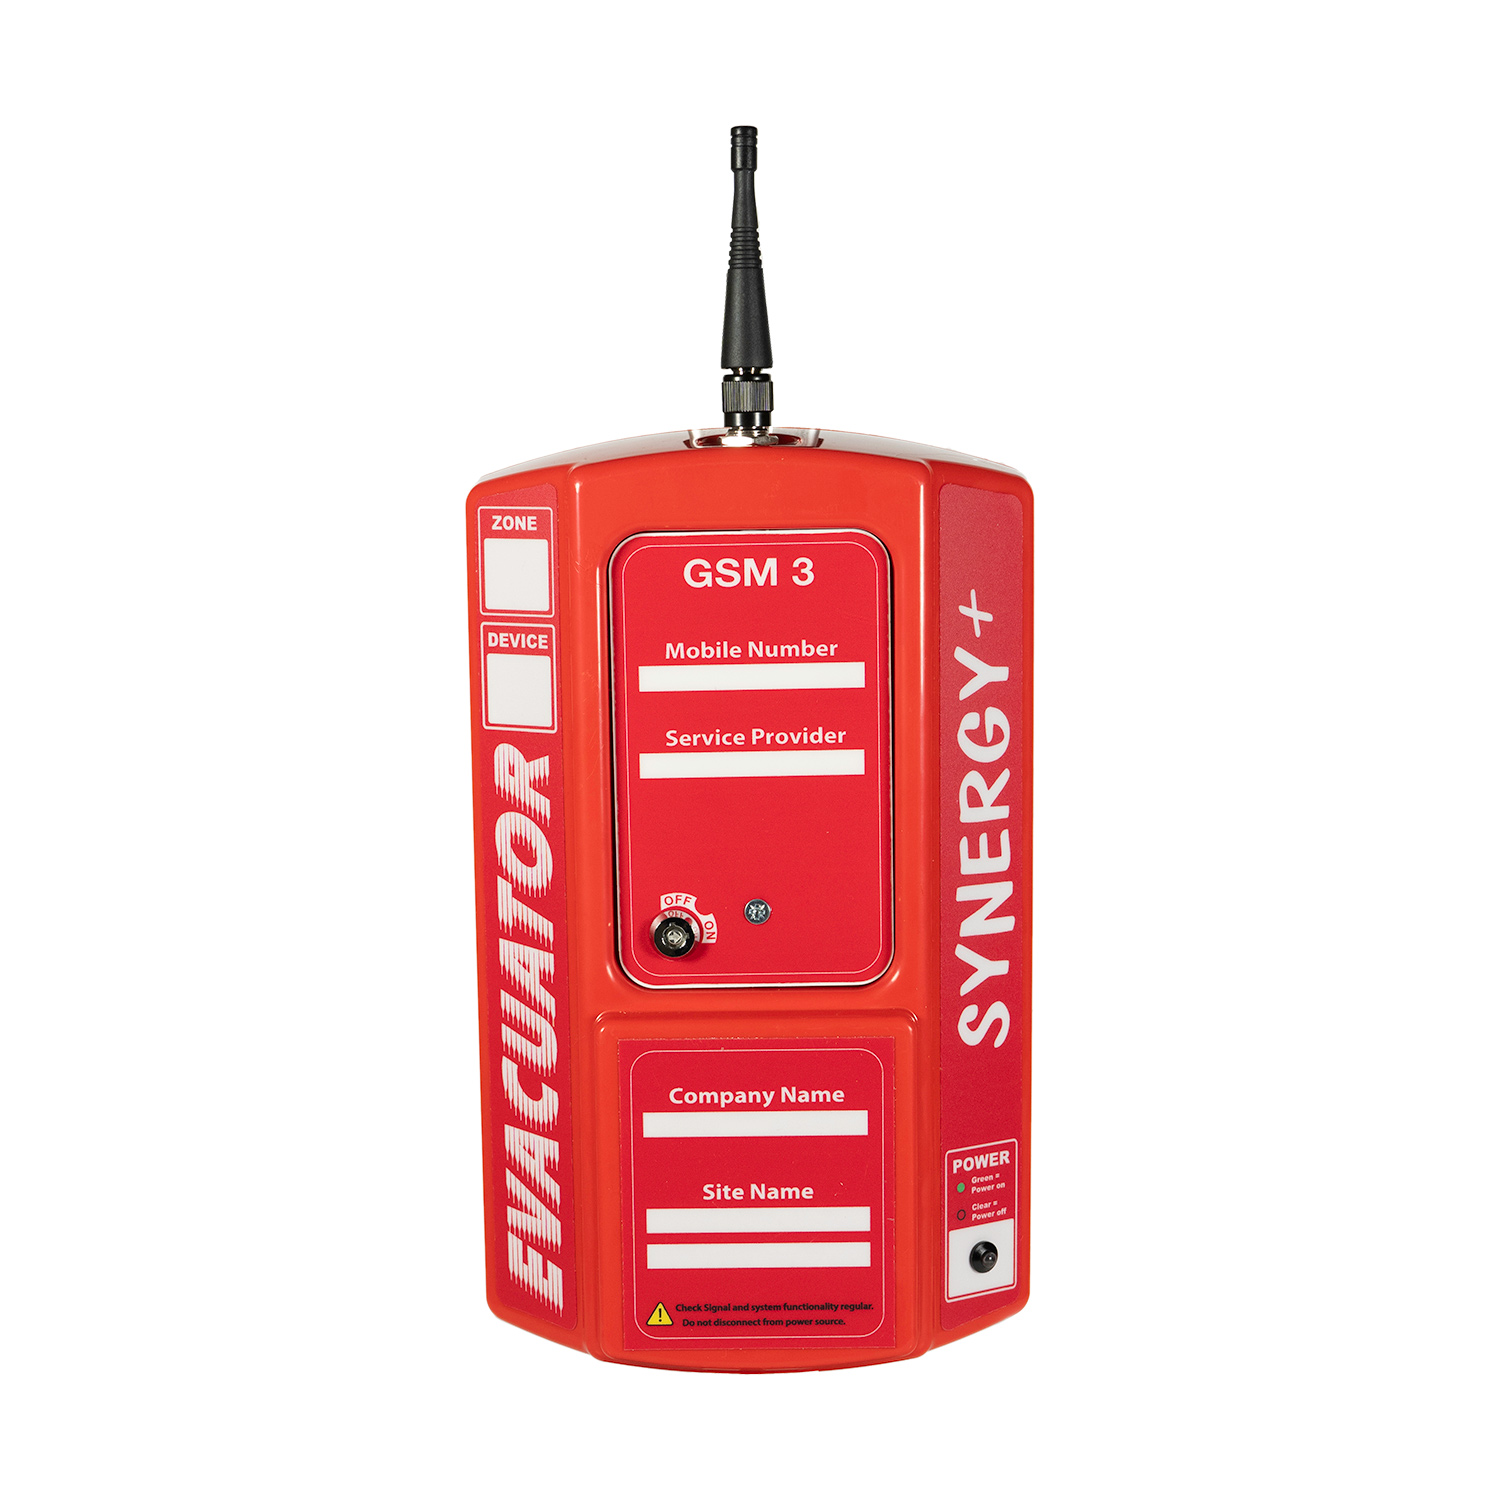 Synergy+ Base Station unit required for GSM Gateway functionality